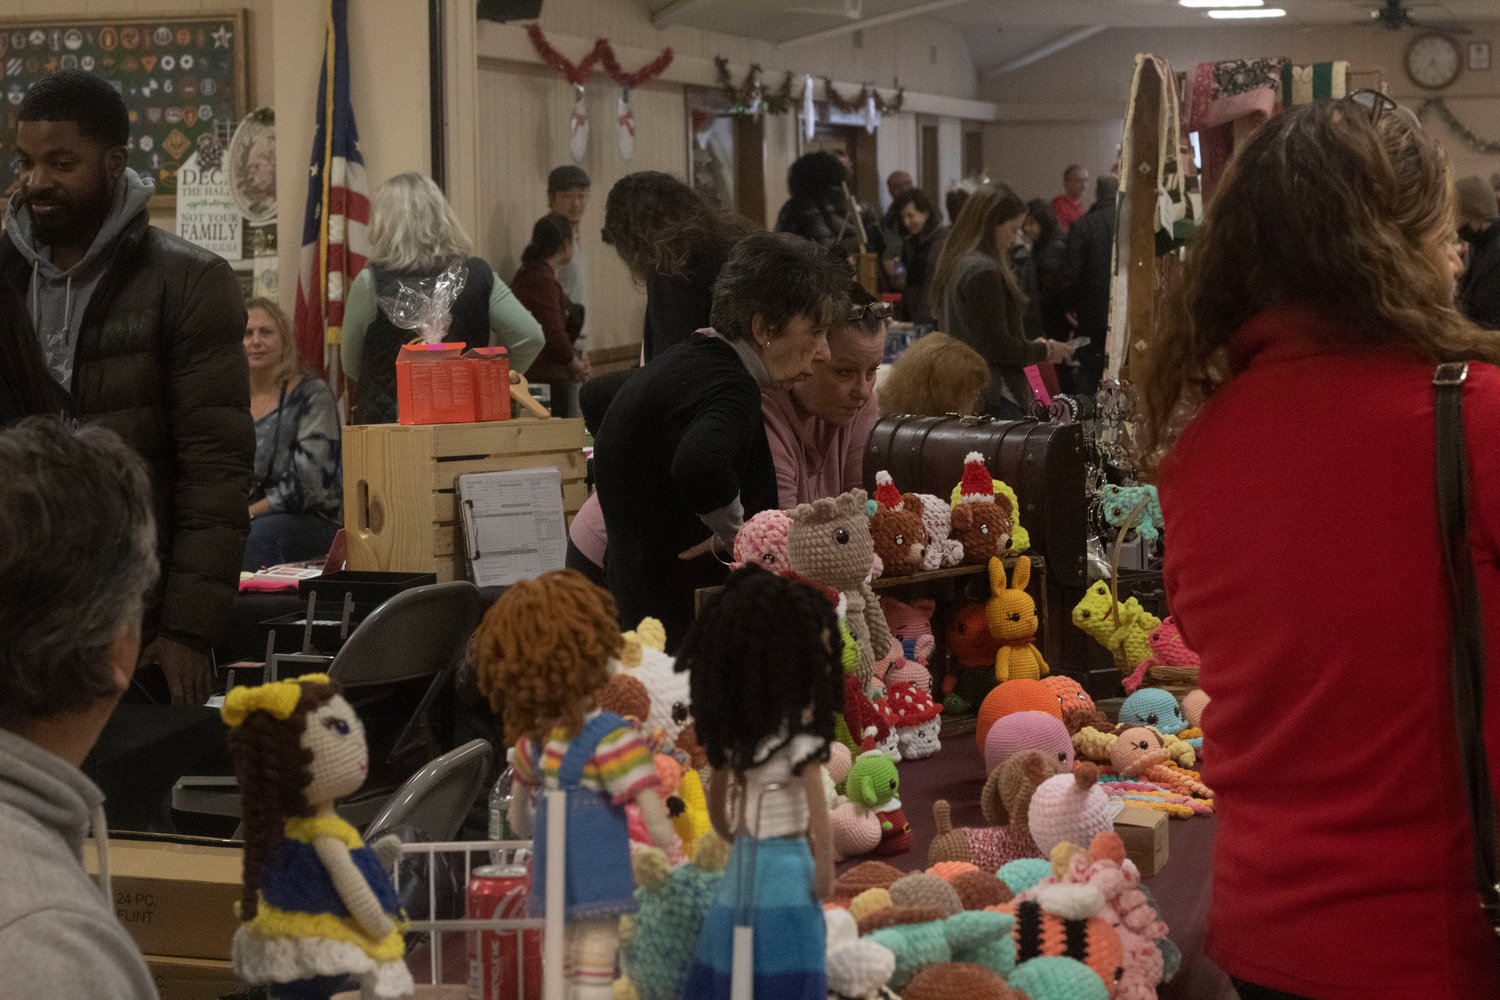 Attendees browsed roughly 30 craft and  artisan vendors at the Holiday Gift Boutique.